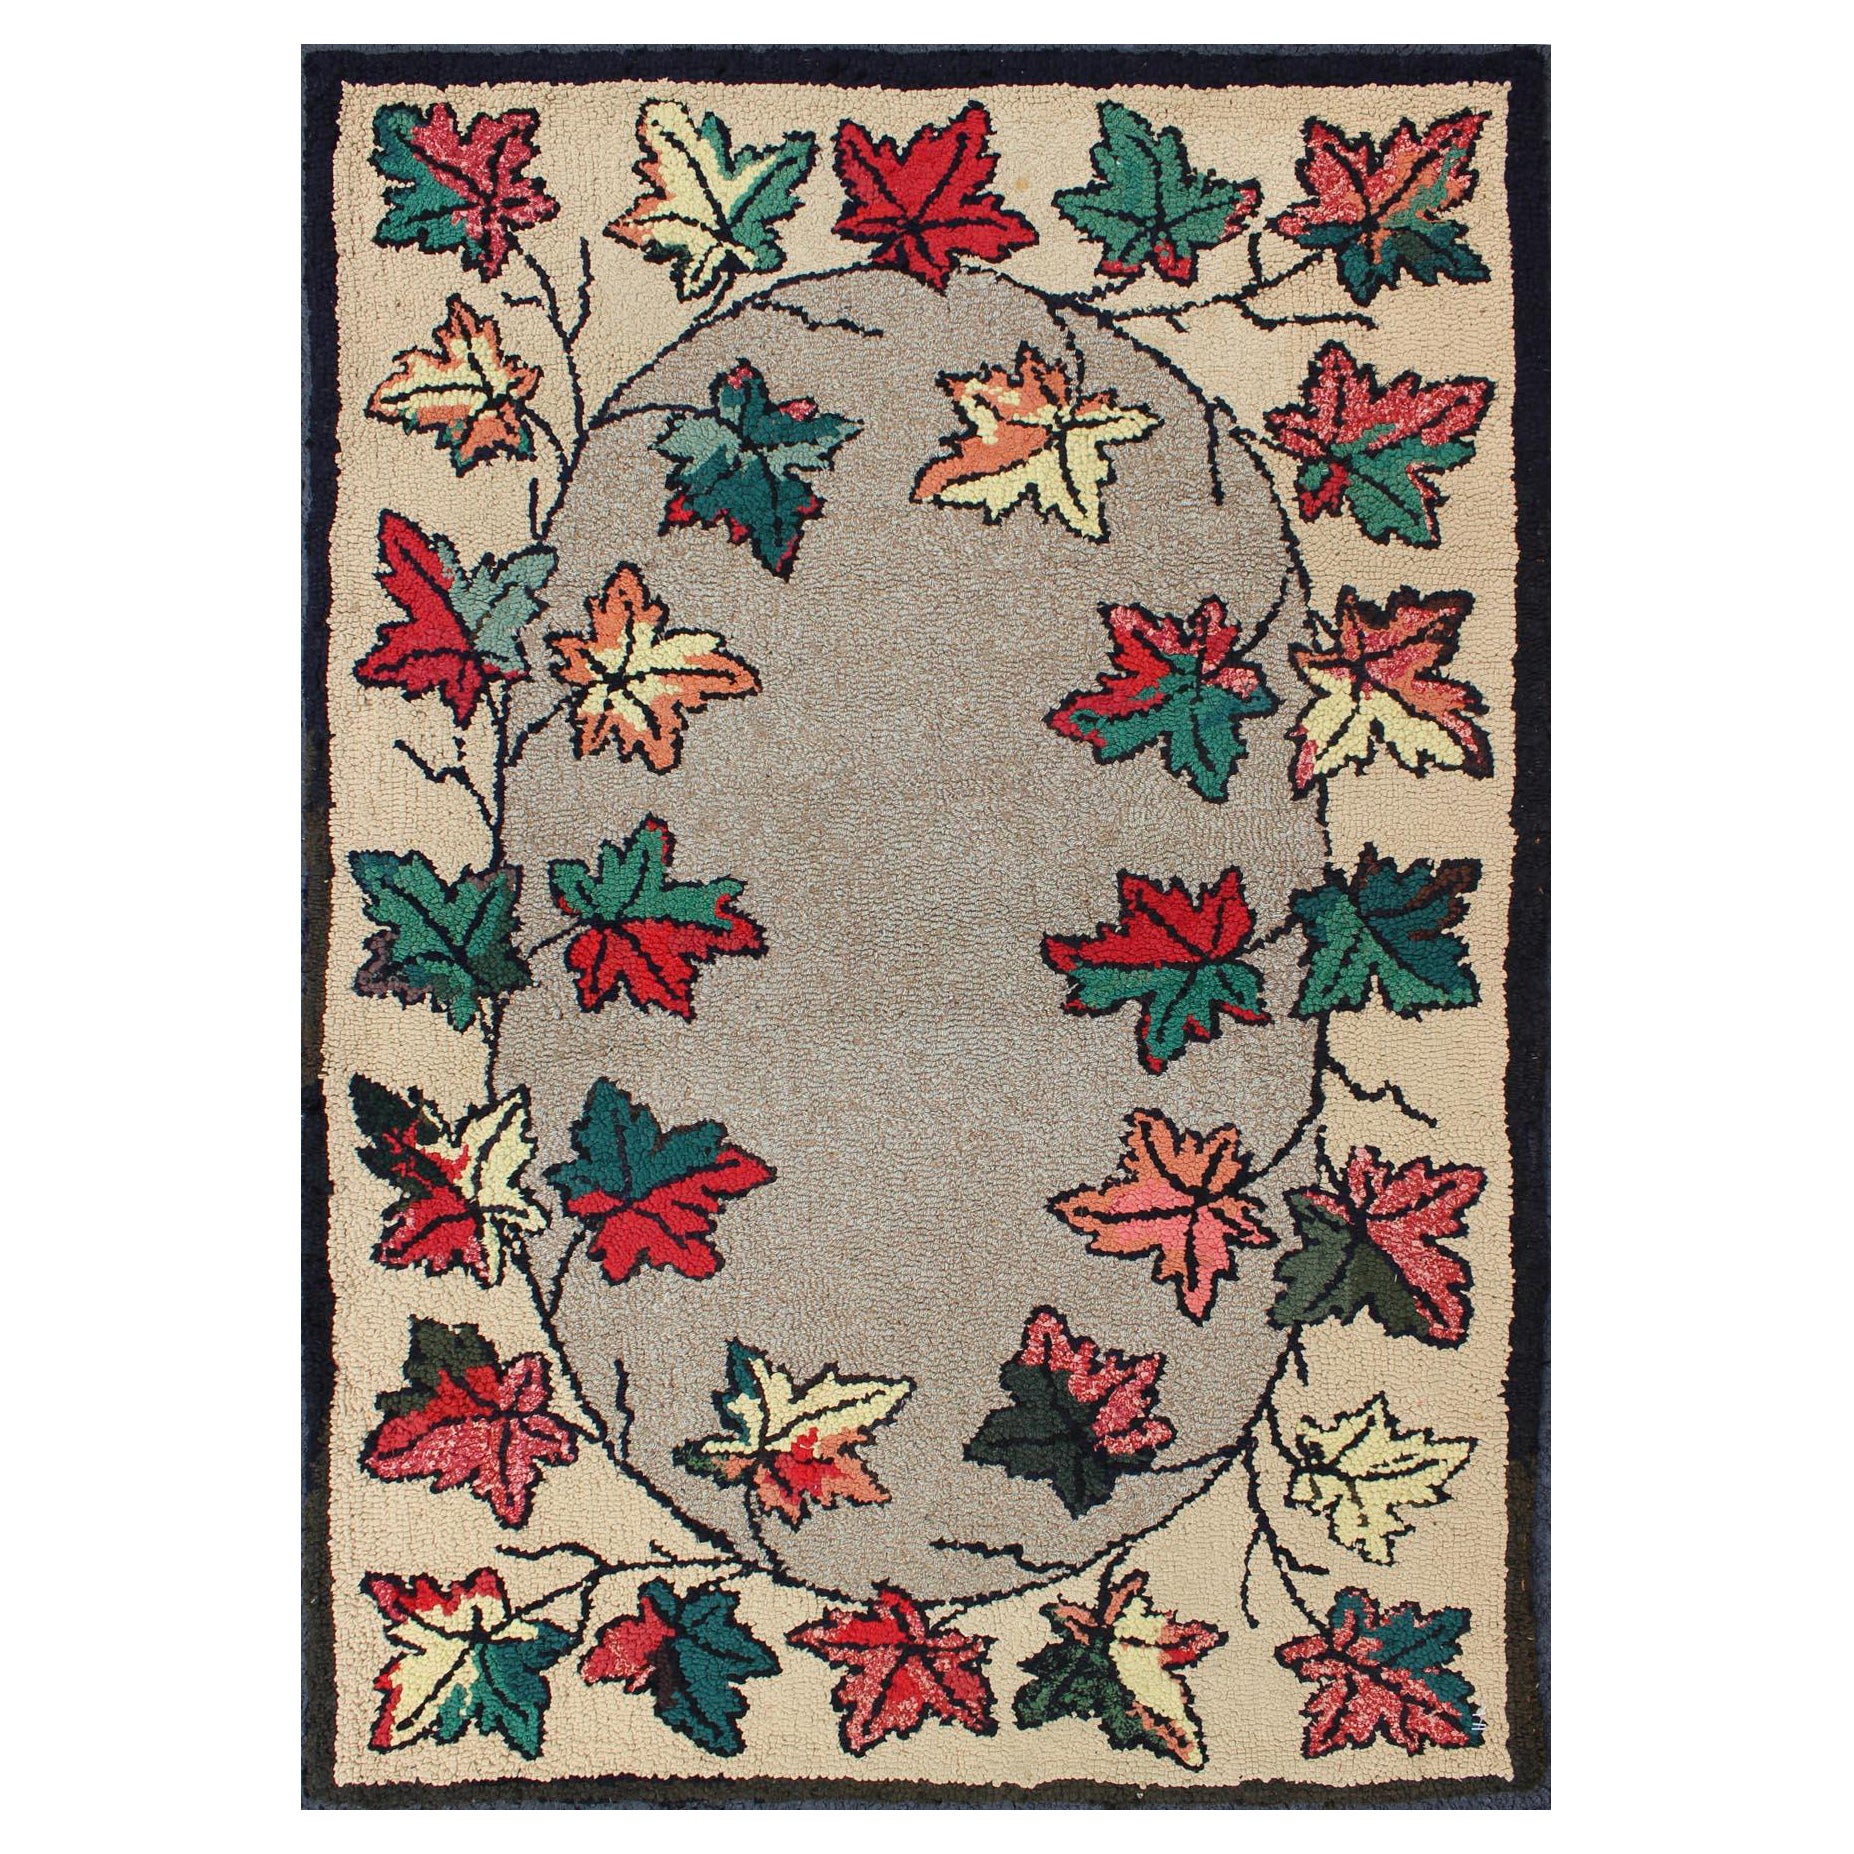 Leaf Design American Hooked Rug in Red, Green, and Charcoal Outlines